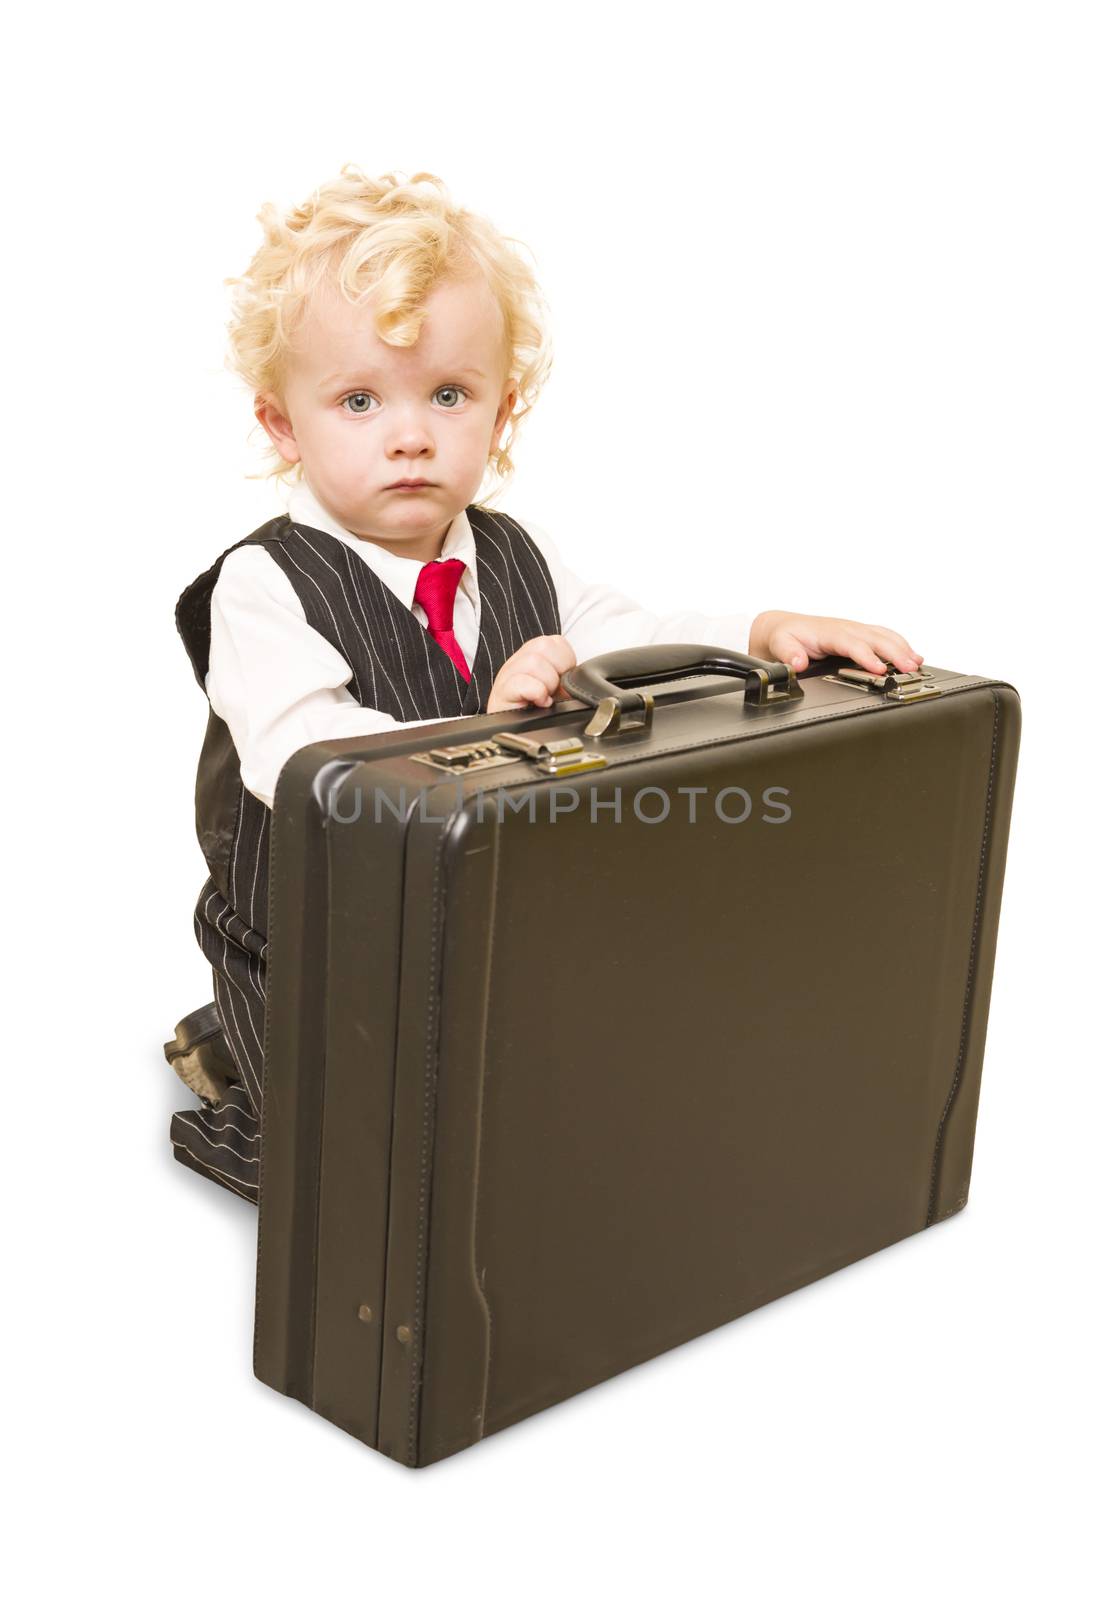 Boy in Vest Suit and Tie with Briefcase On White by Feverpitched